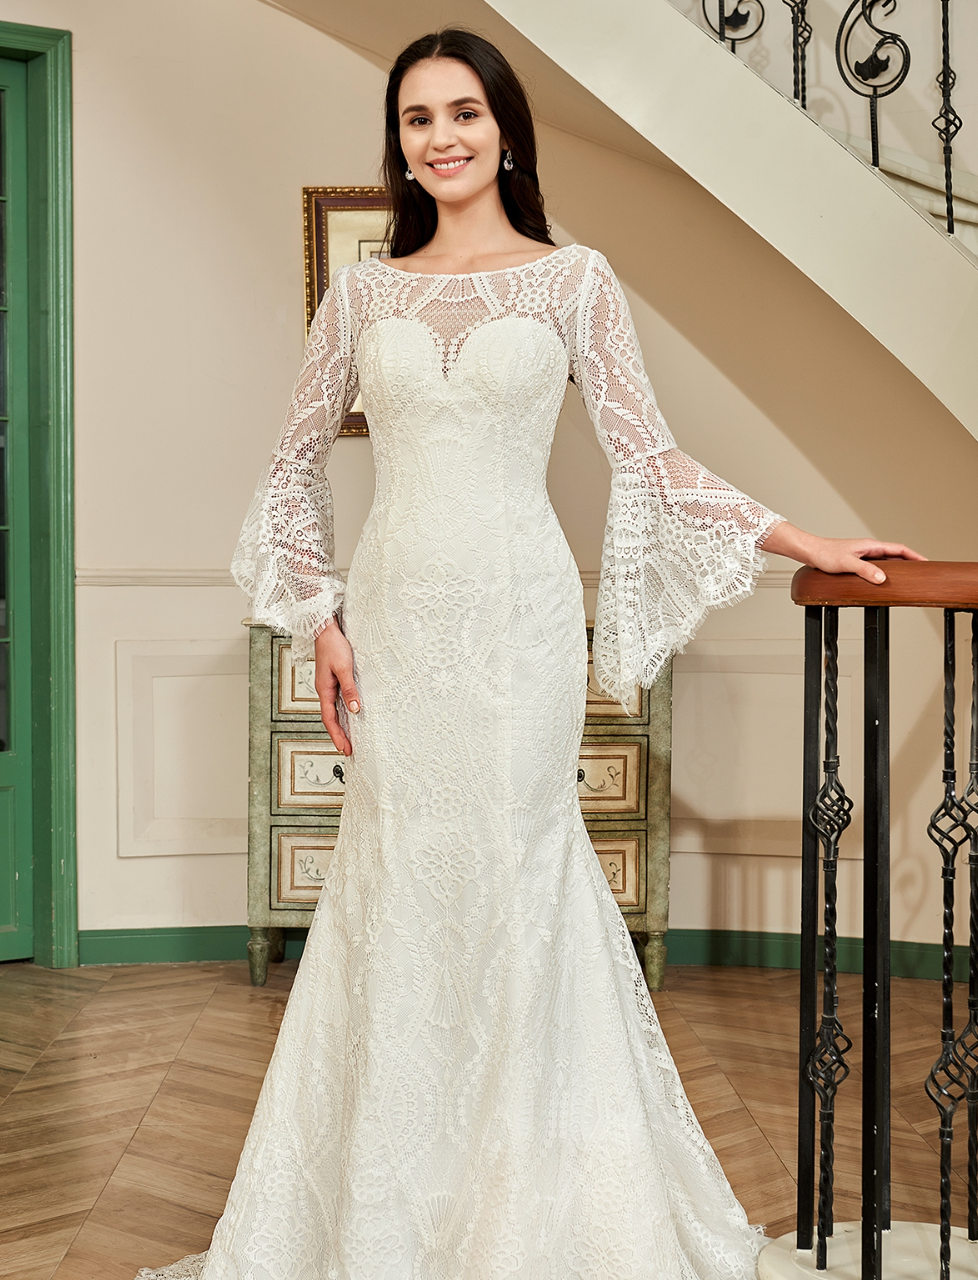 Illusion Neckline Lace Wedding Dress  Removable Overskirt – TulleLux  Bridal Crowns & Accessories